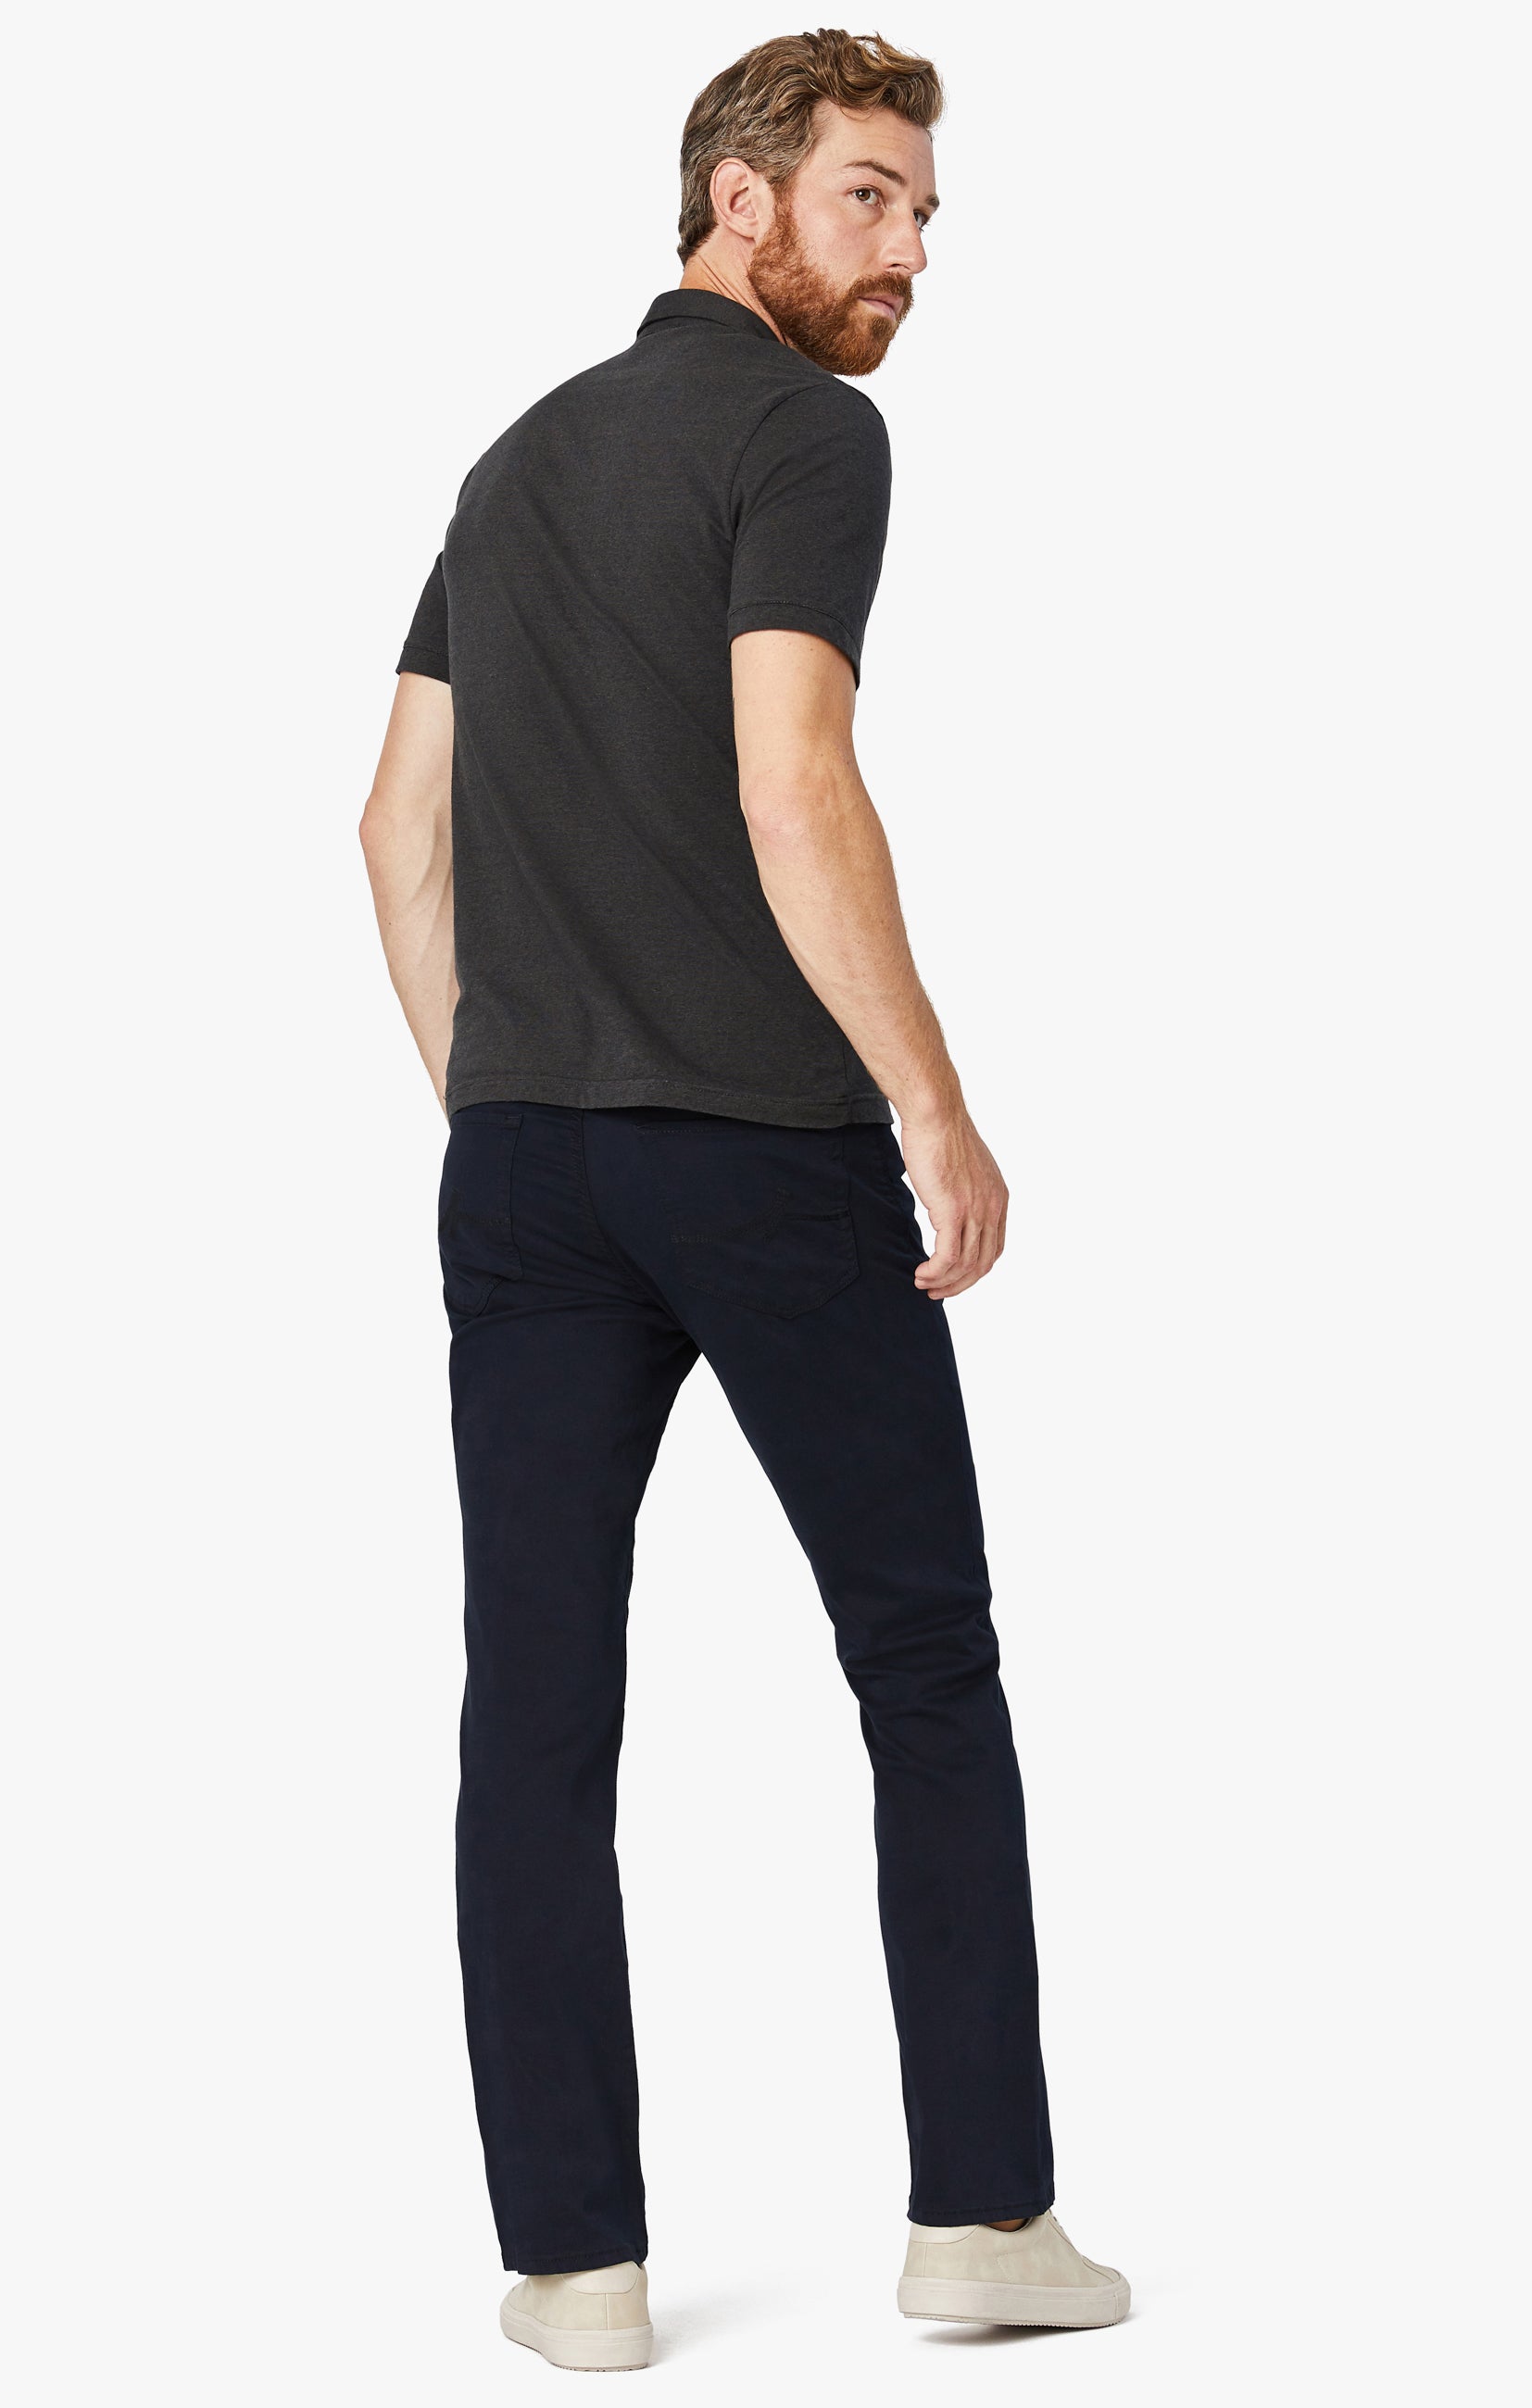 Charisma Classic Fit Pants in Navy Twill Image 7